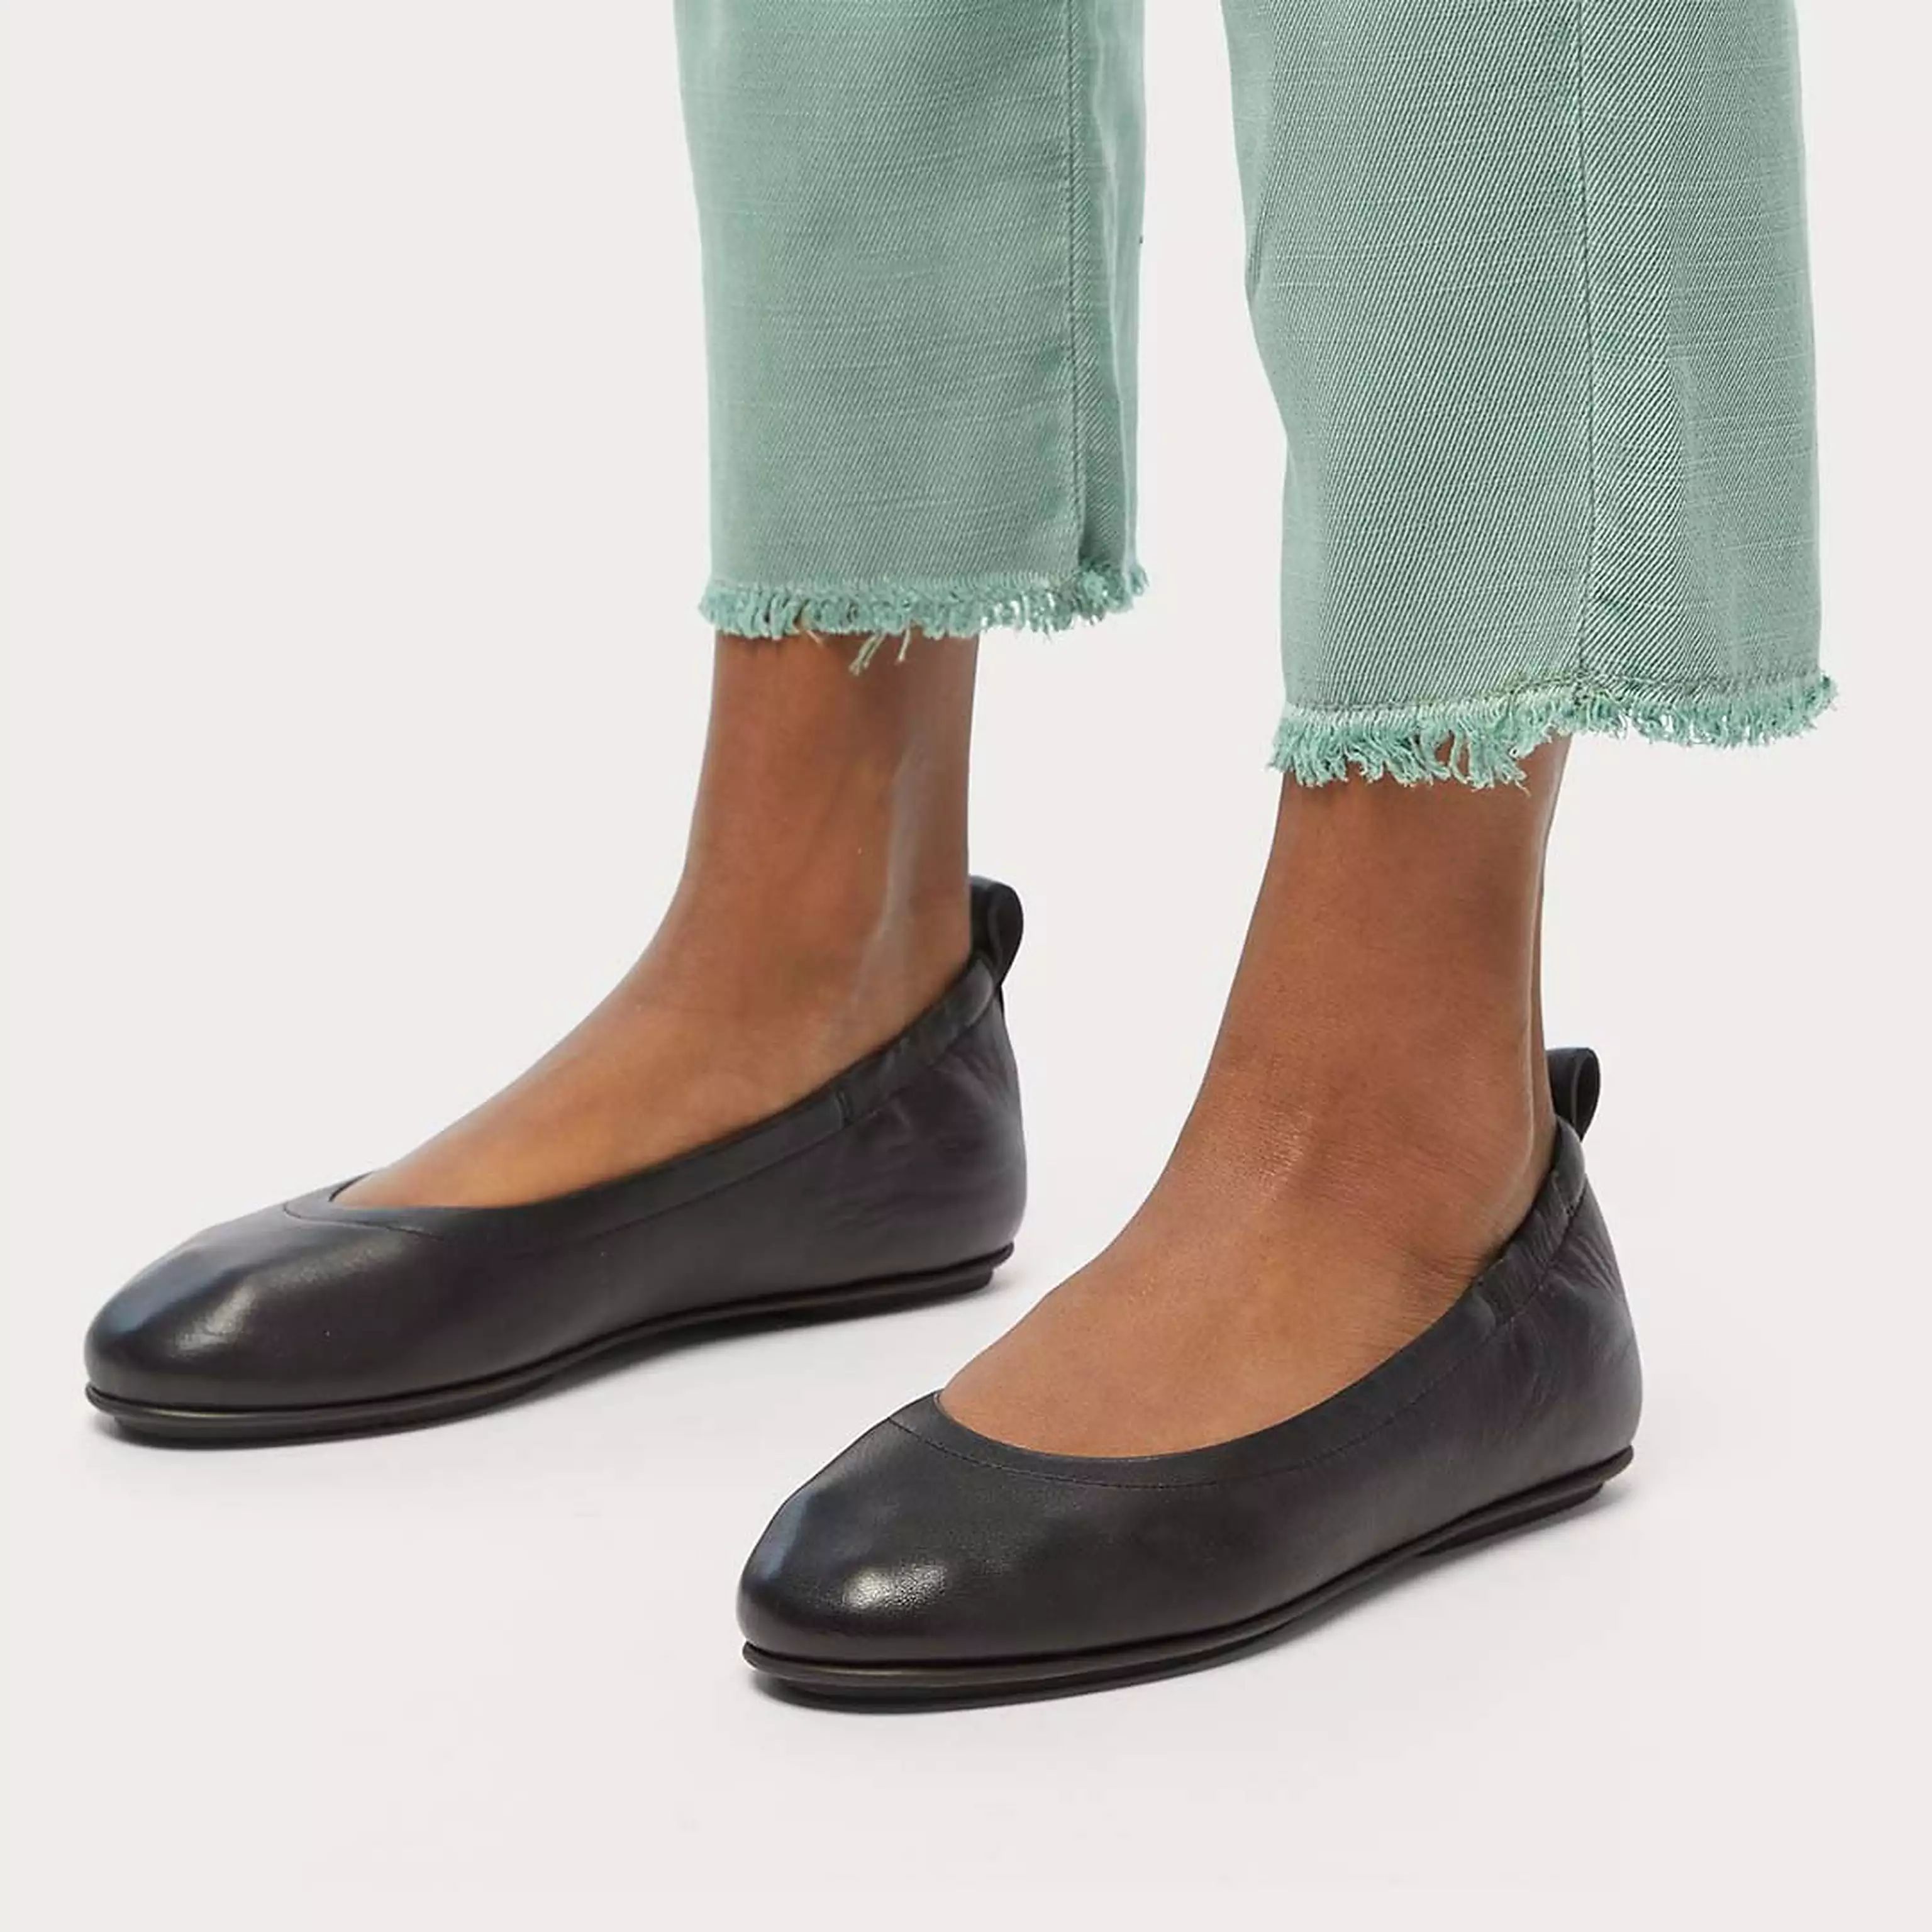 ALLEGRO Soft Leather Ballet Flats | FitFlop (US)